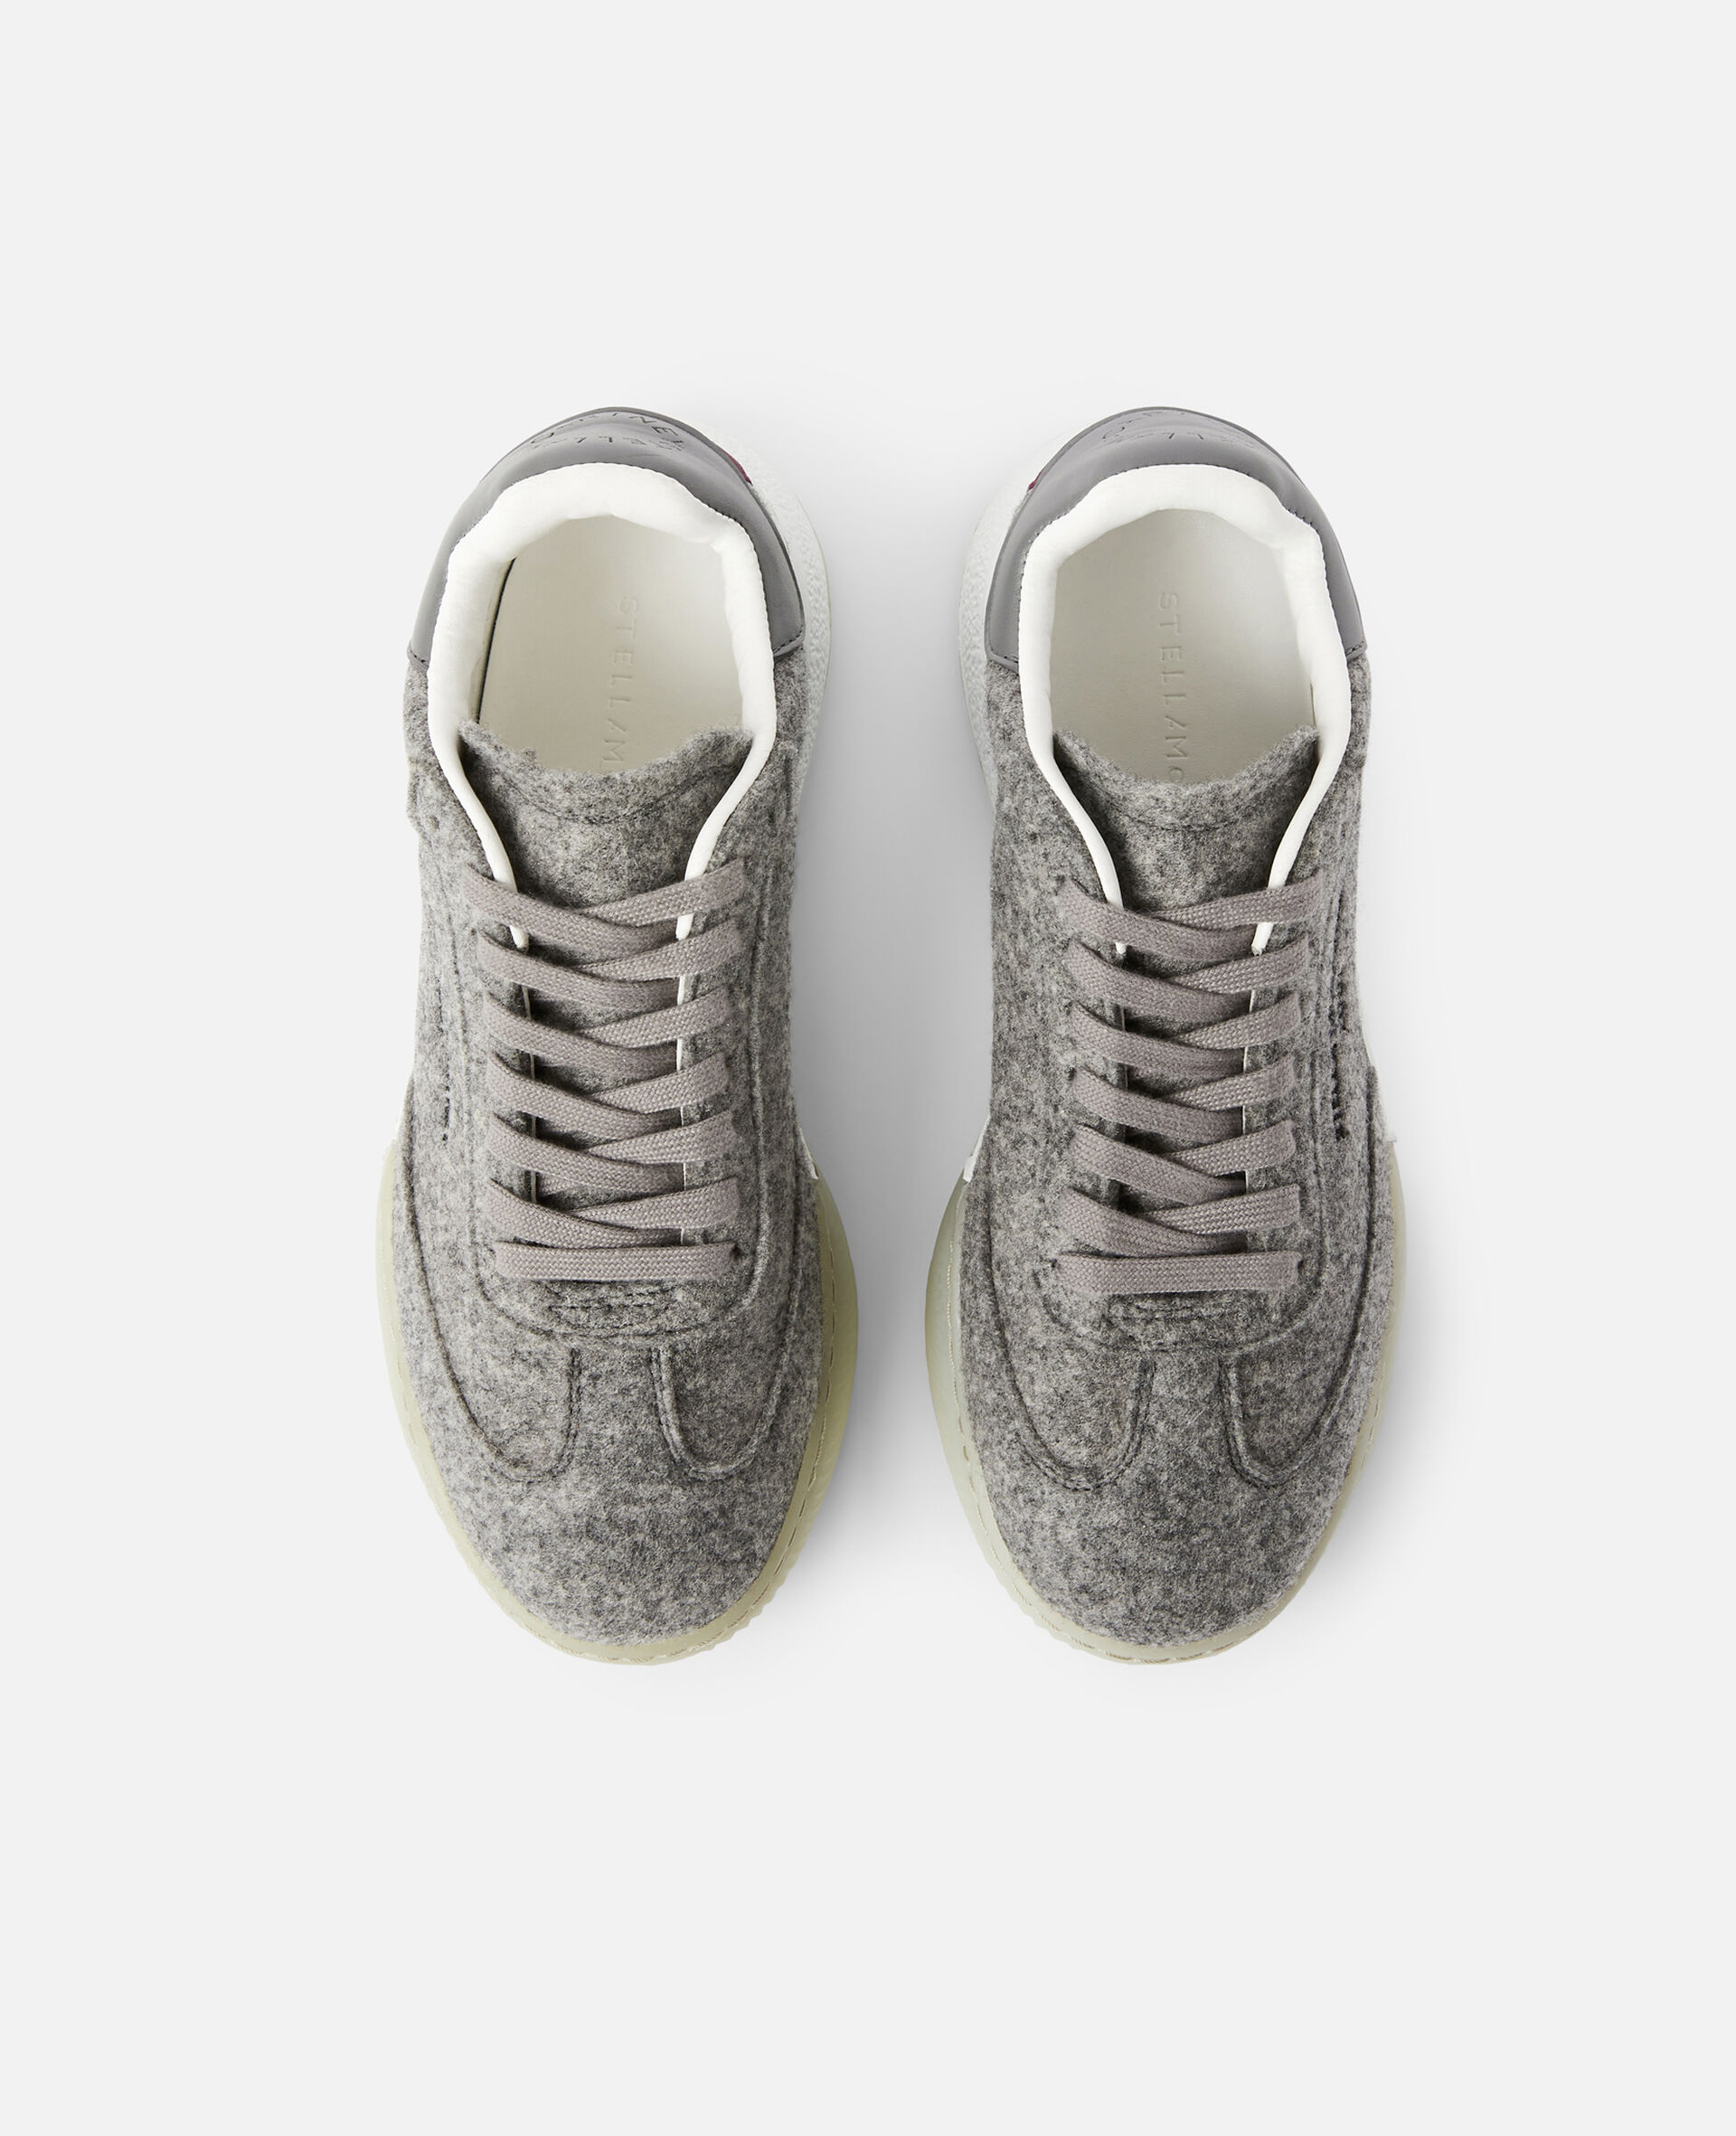 Loop Lace-up Sneakers-Grey-large image number 3